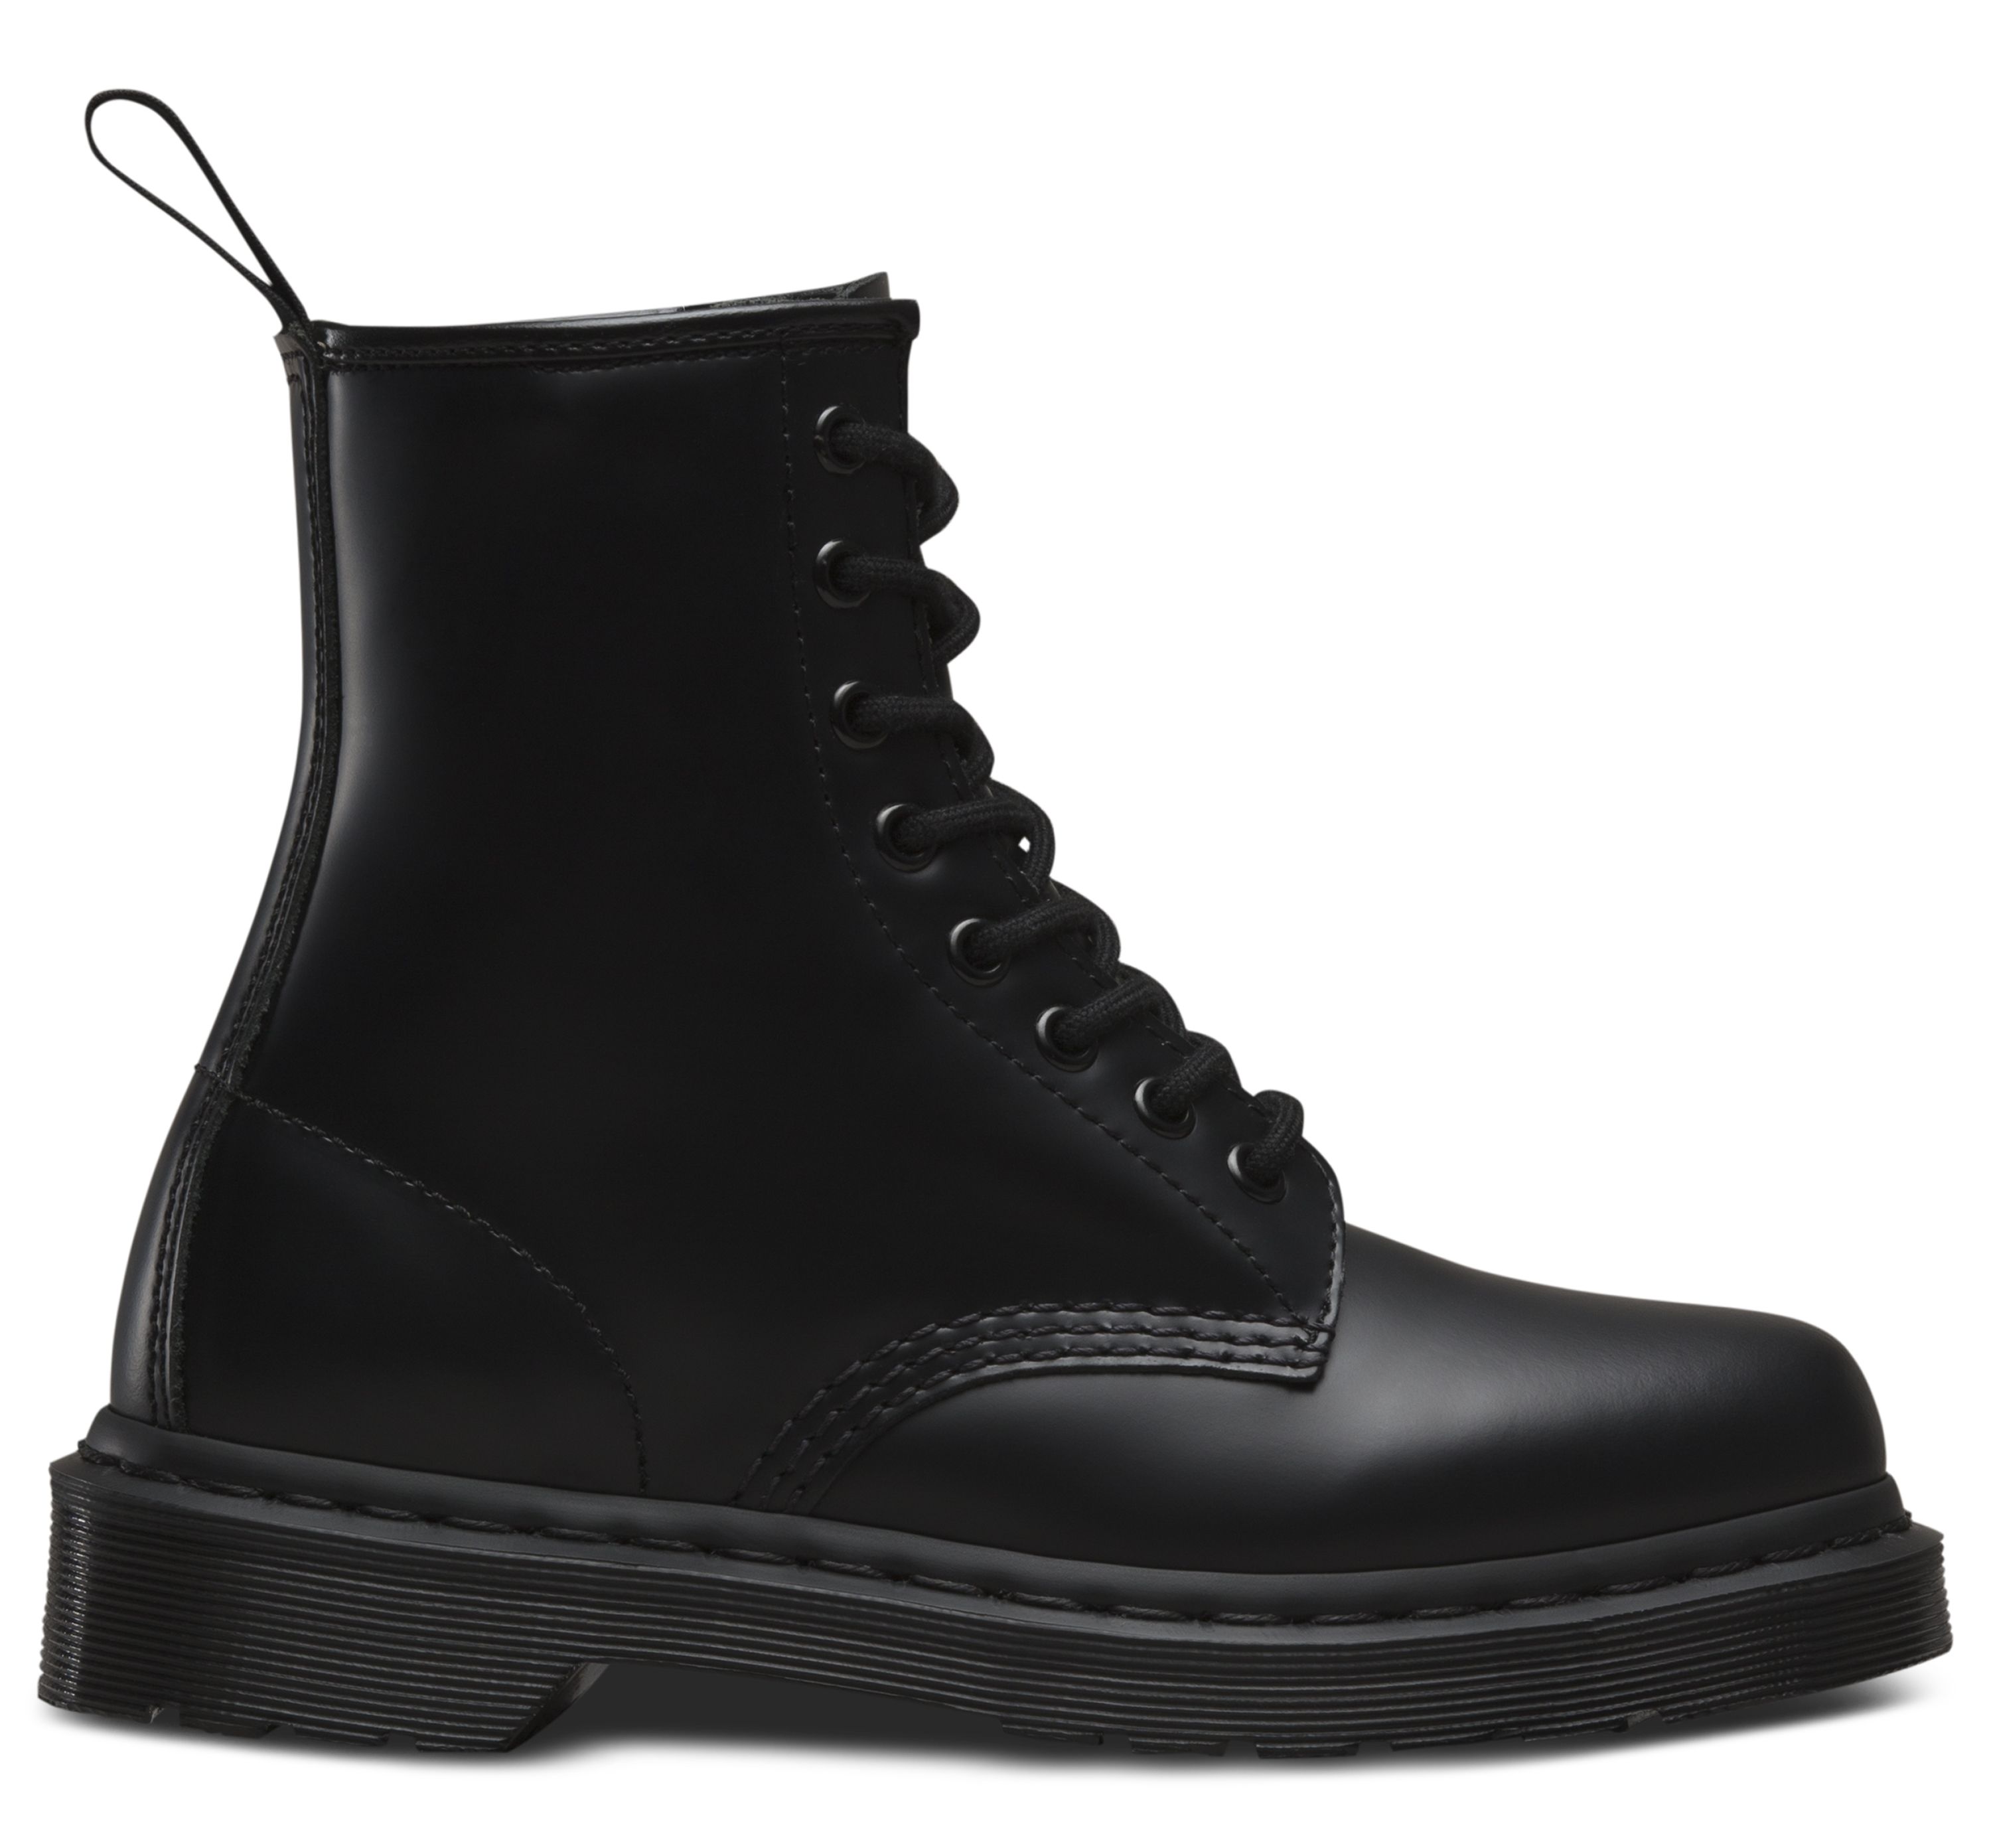 Dr. Martens 1460 Mono Smooth Leather Lace Up Boots in Black Smooth | Neon